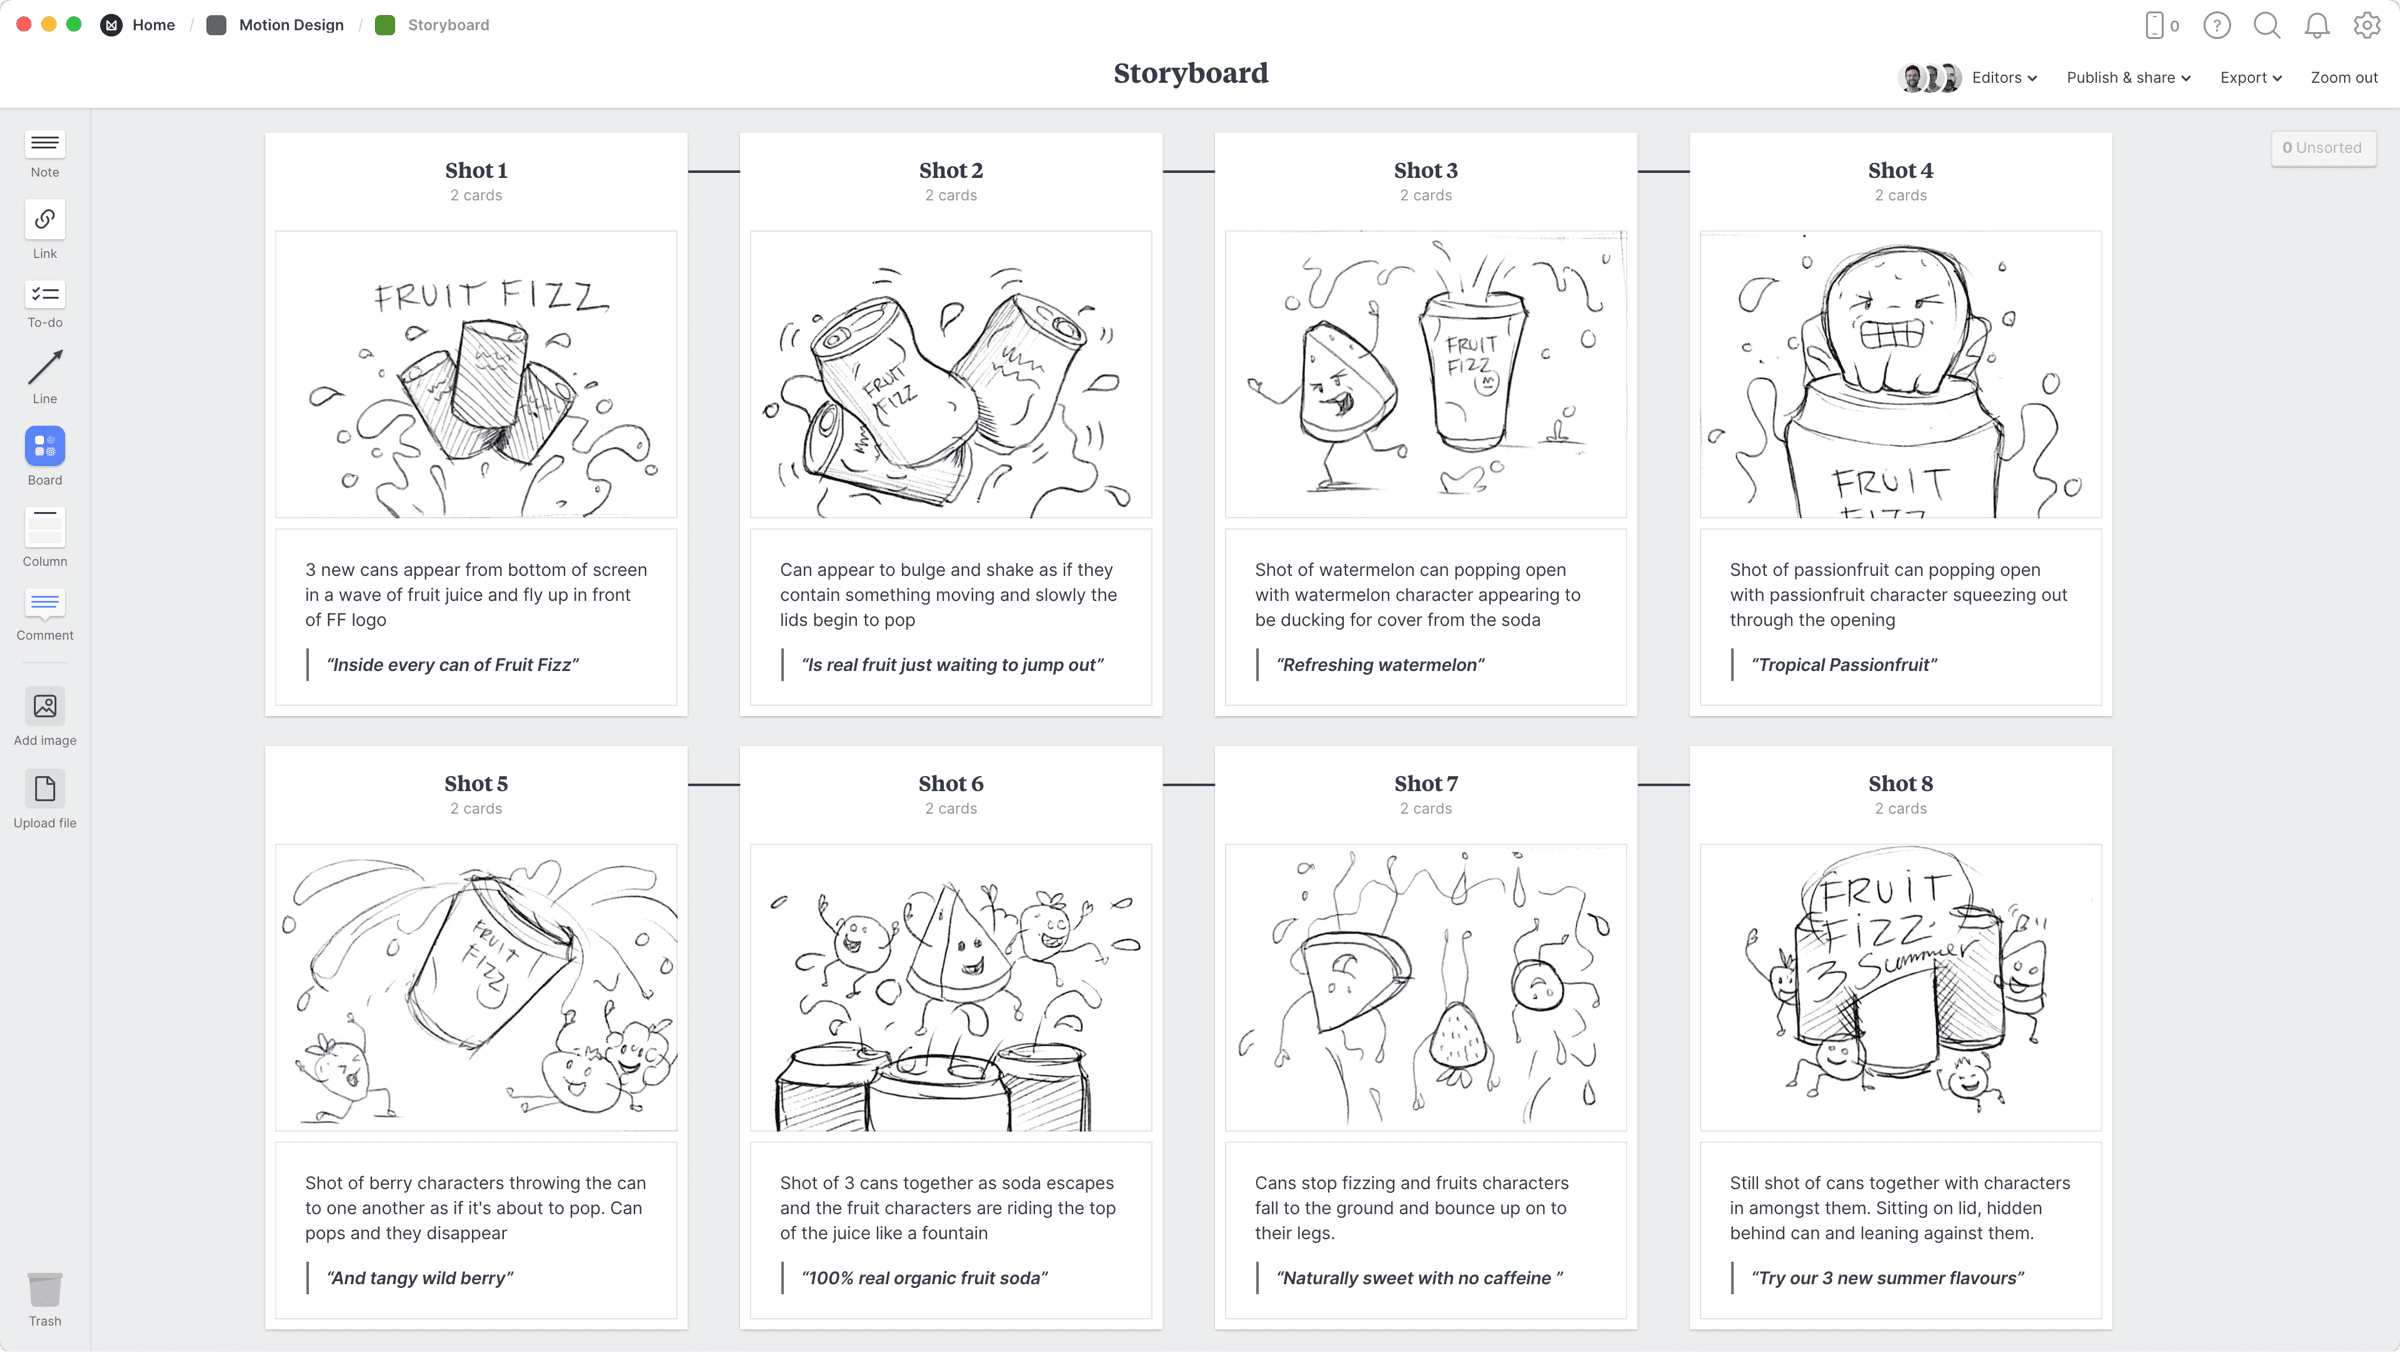 Motion Design Storyboard Template, within the Milanote app